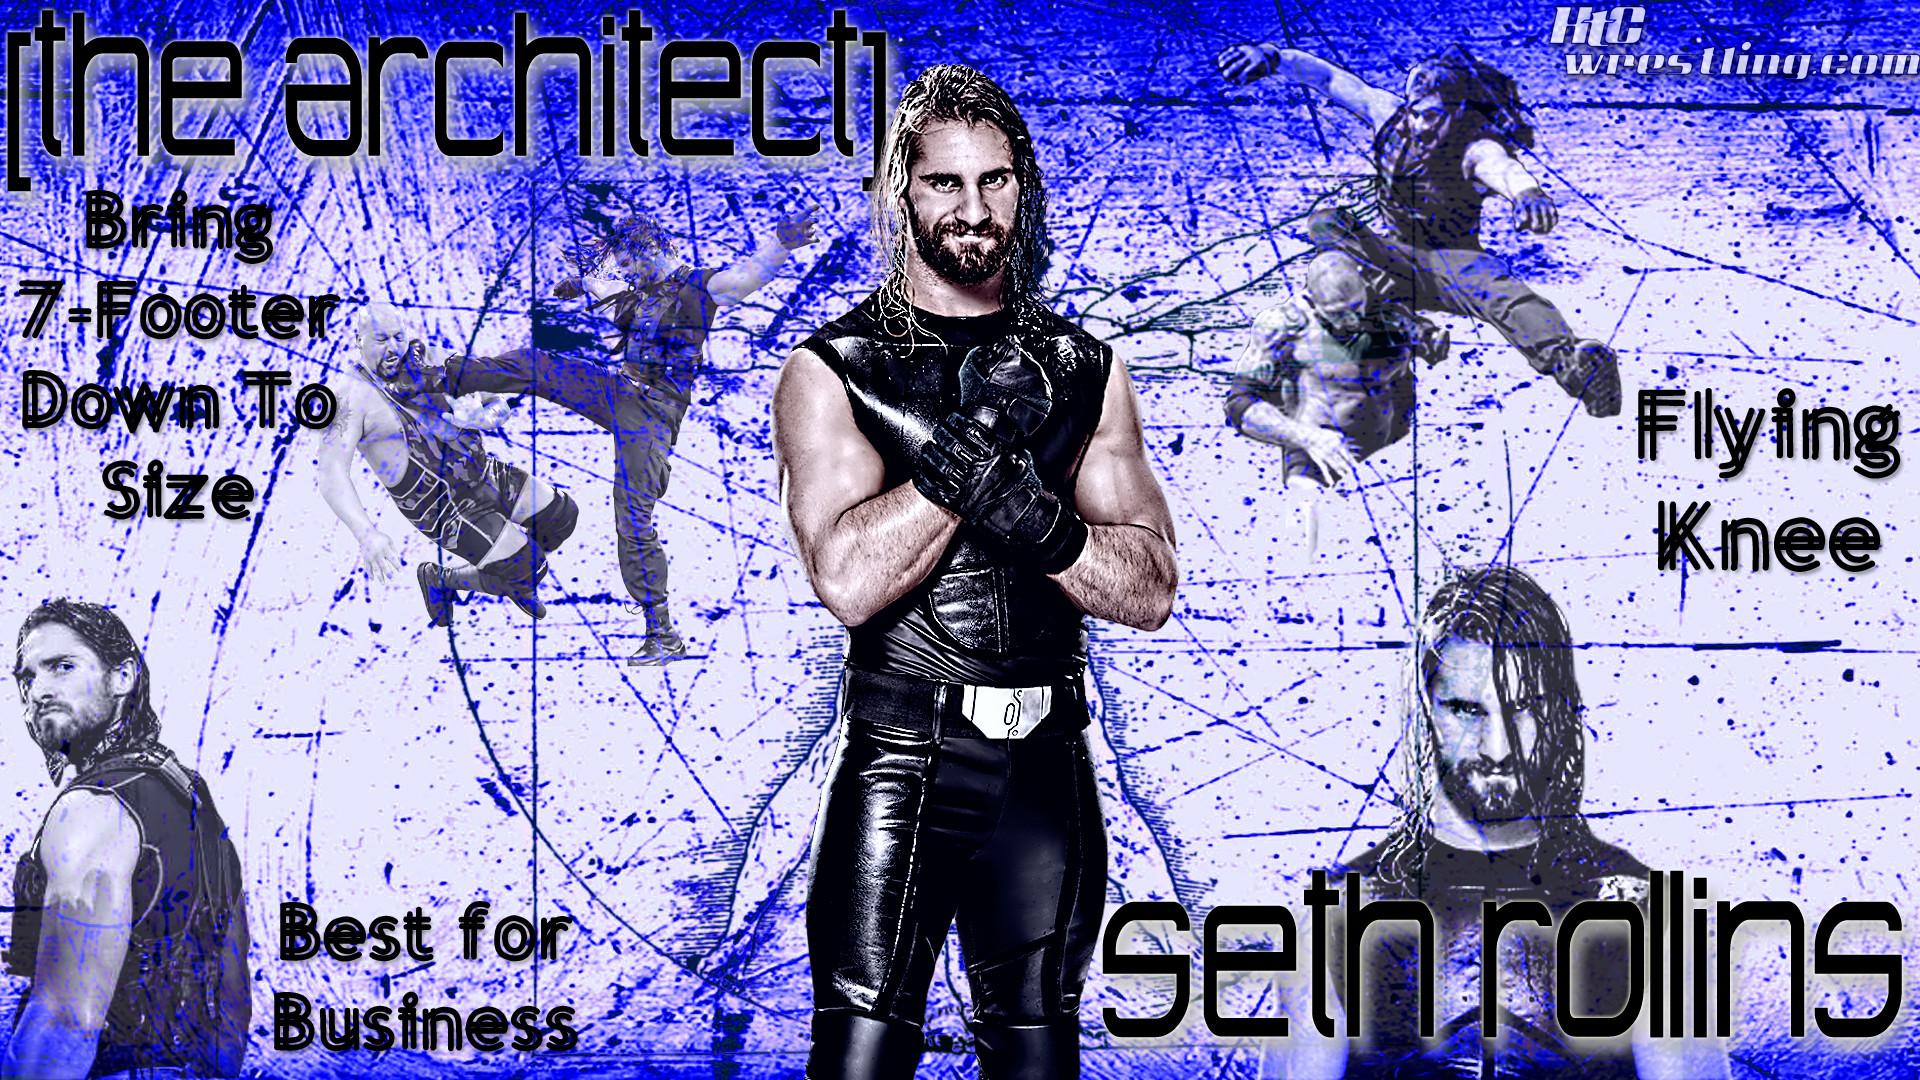 1920x1080 Wallpaper Of The Week: Seth Rollins “The Architect” Wallpaper